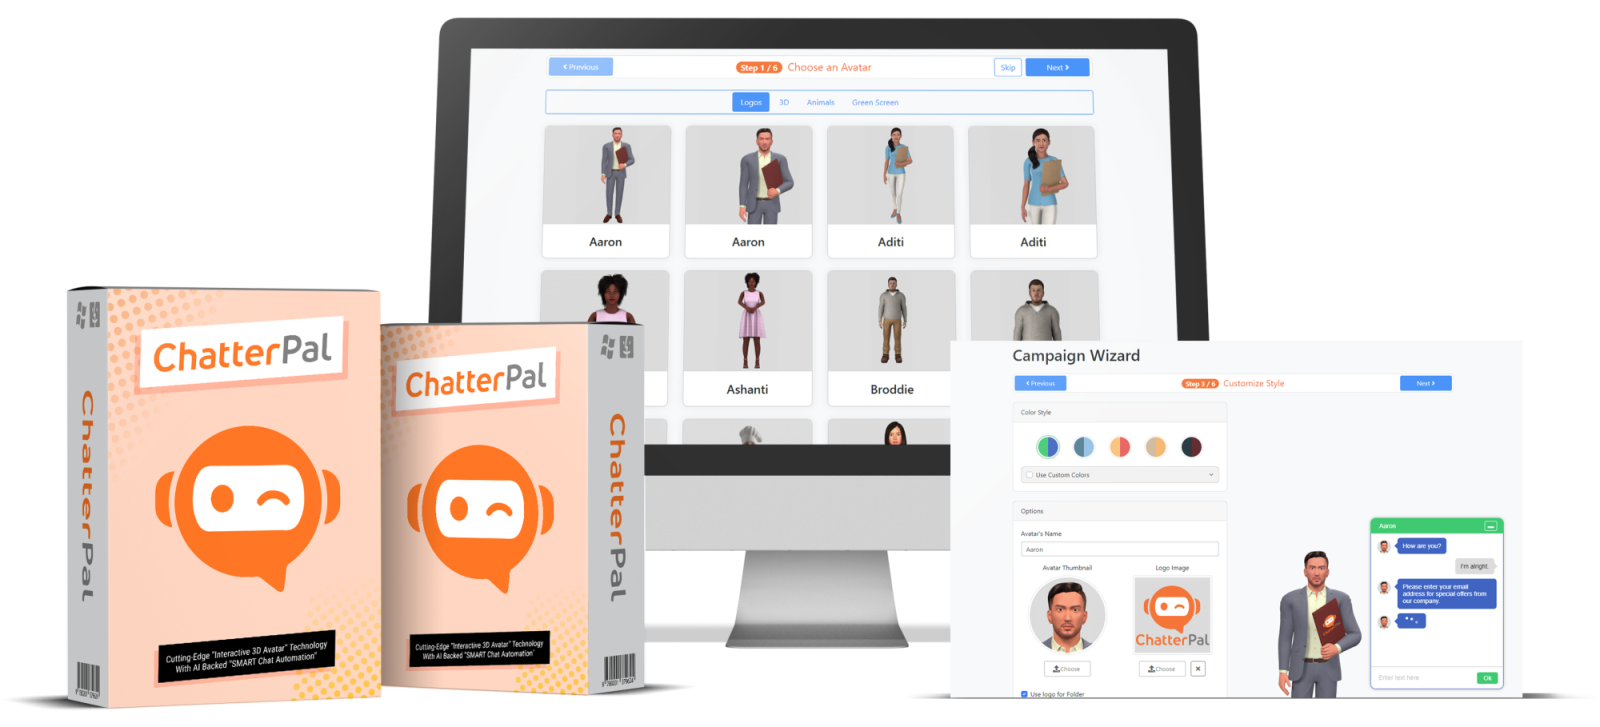 ChatterPal Review – Merges Cutting-Edge “Interactive 3D Avatar” Technology with AI backed “SMART Chat Automation”